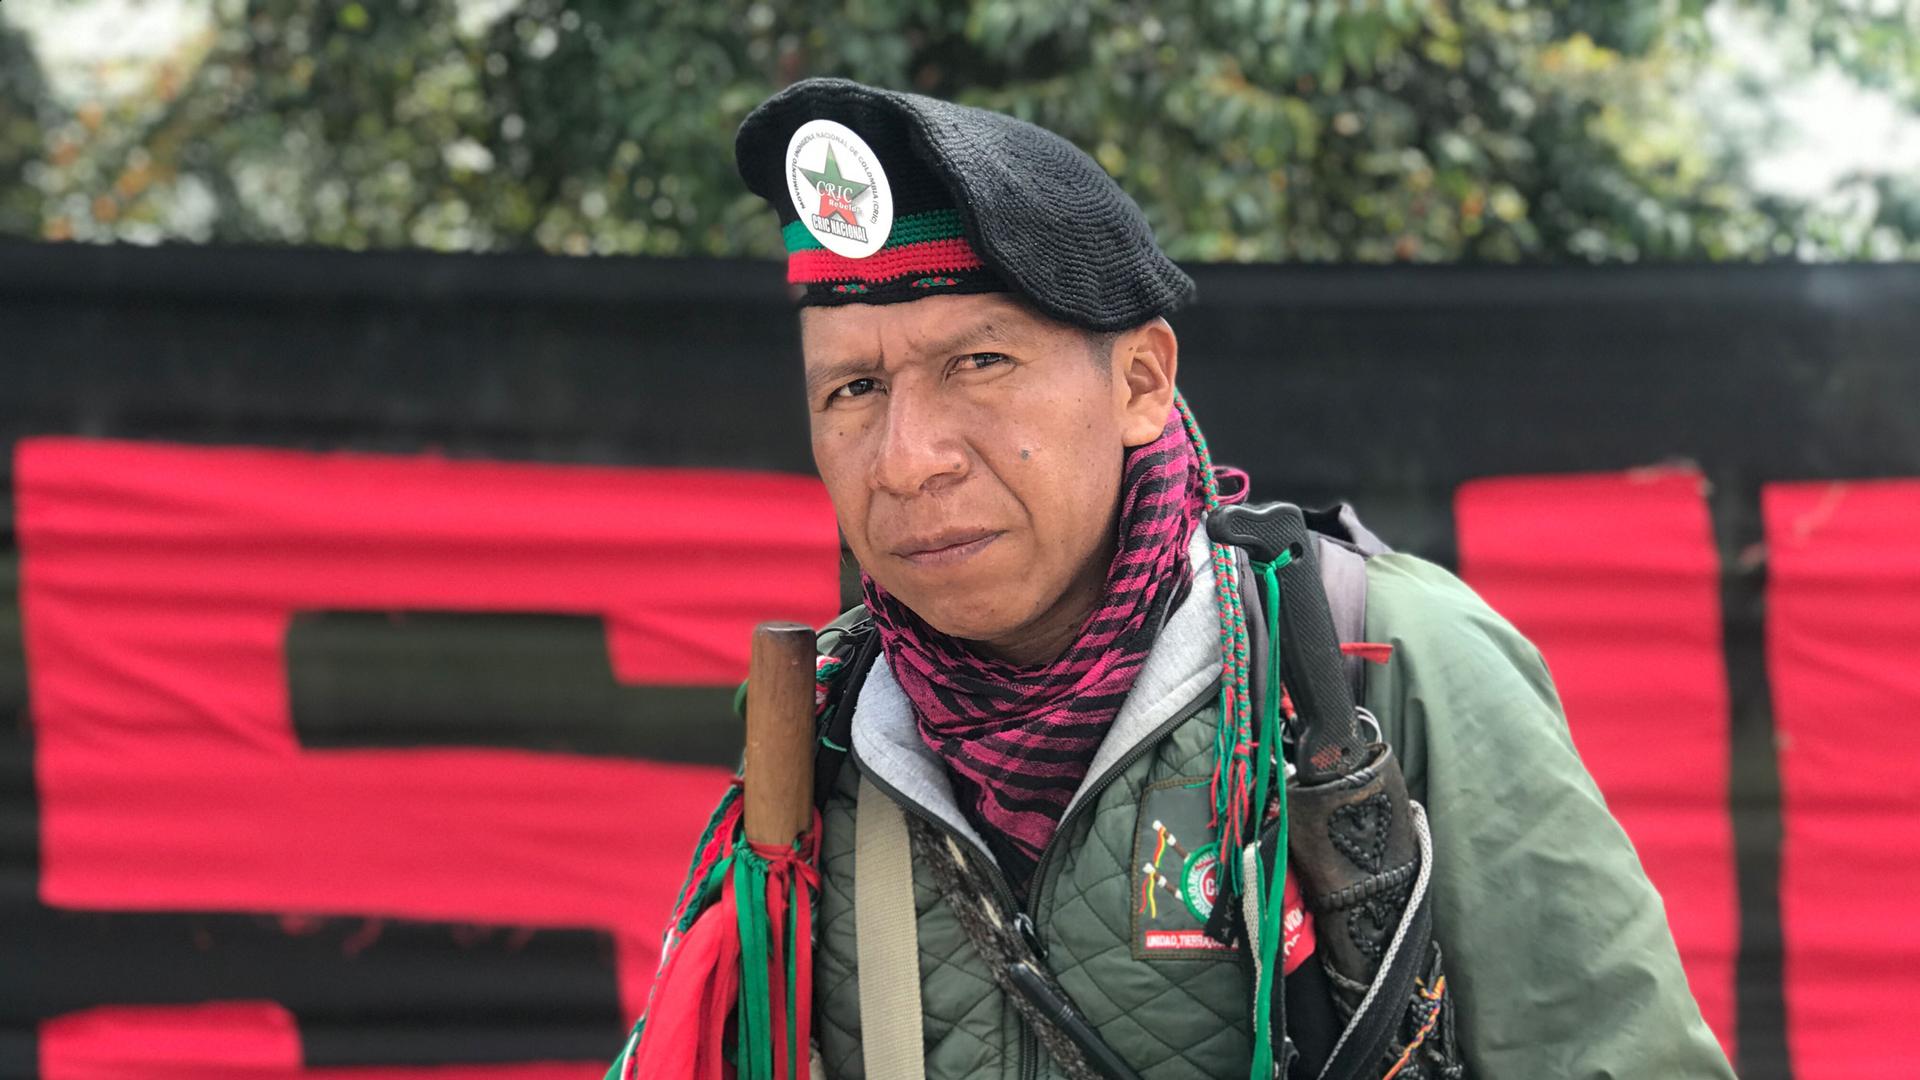 Jose Albeiro Camayo is show in a close-up photograph wearing a red beret.